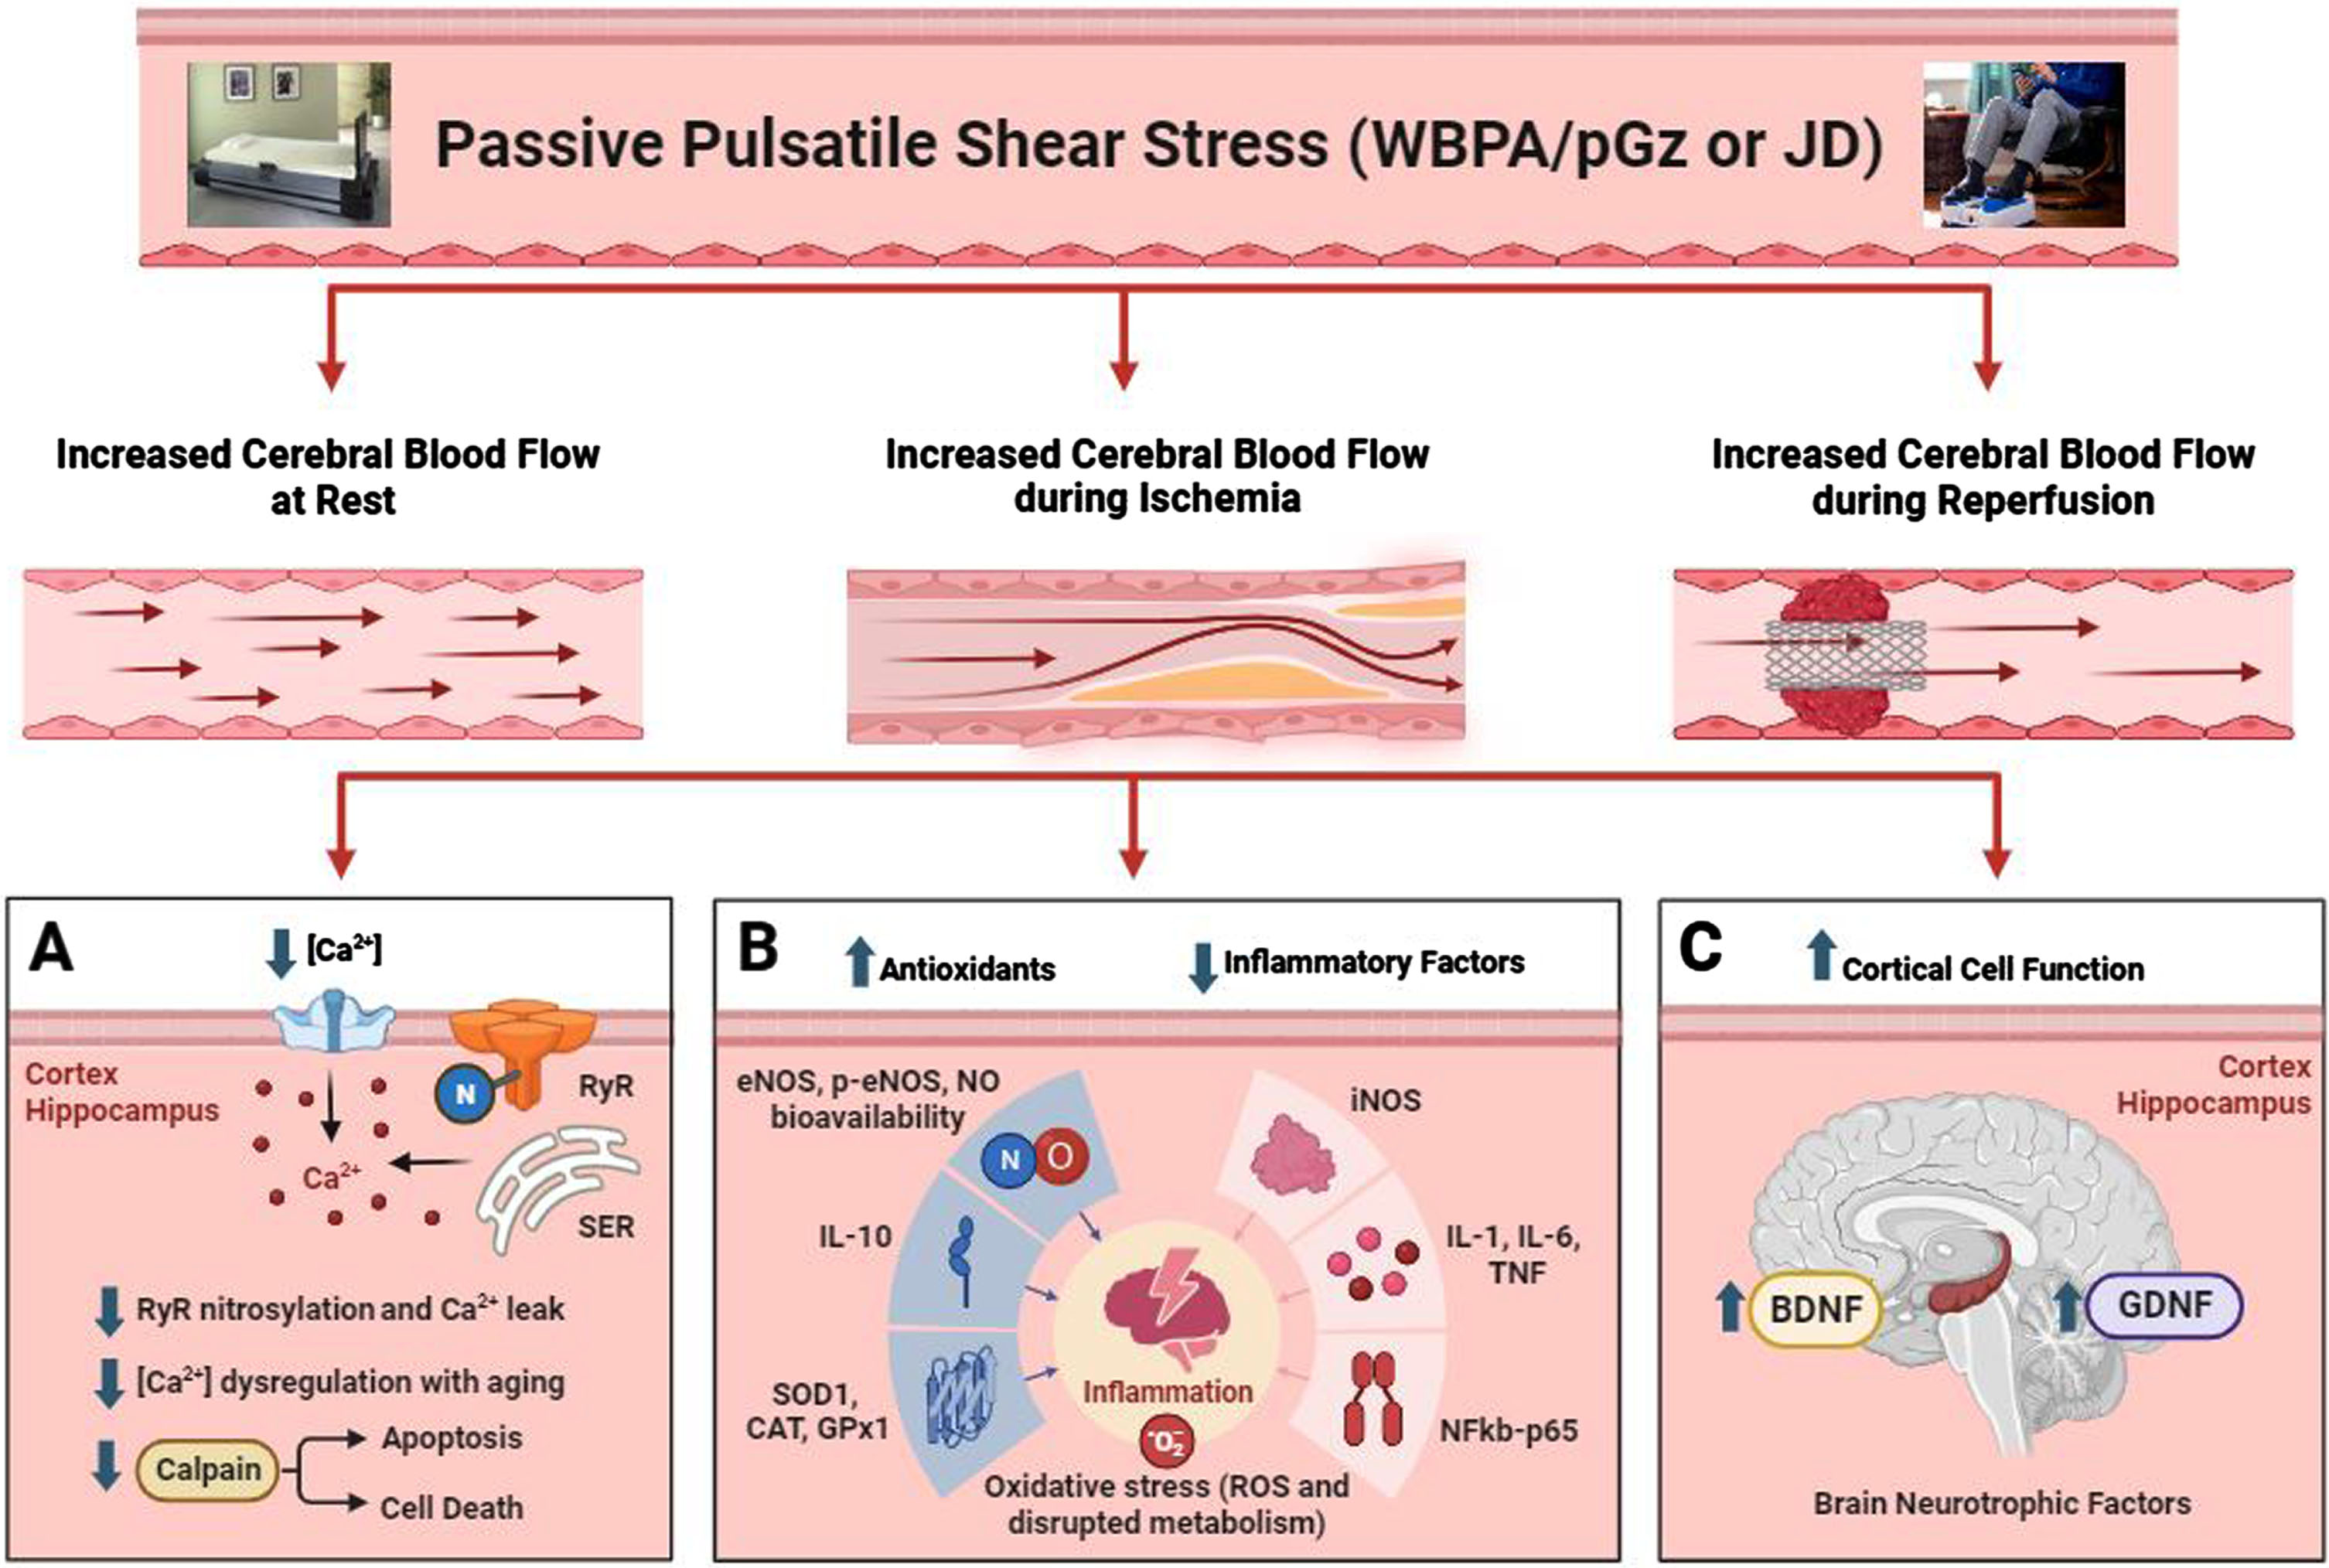 Mechanistic Summary of the Effects of Passive Pulsatile Shear Stress (WBPA/pGz or JD) in Alzheimer’s Disease. PPSS as produced by WBPA/pGz or JD, elicits a wide variety of hemodynamic and protein expression changes which include: increase regional cortical and microvascular blood flow at rest, during ischemia and during reperfusion; improved [Ca2+]i homeostasis and dysregulation, with a decrease in Ca2+ leak and RyR nitrosilation, a decrease in Ca2+ influx, and a decrease in Calpain (A); decrease in the inflammatory phenotype with decrease in pro-inflammatory cytokines (TNFα, NF-κβ-p65, IL-1β, IL-6) and increase in anti-inflammatory cytokine (IL-10); increase in protein expression of eNOS, p-eNOS; and antioxidants (GPX1, CAT, SOD); decrease in reactive oxygen species (ROS) production and increase NO bioavailability (B); increase in brain neurotrophins; BDNF and GDNF (C).